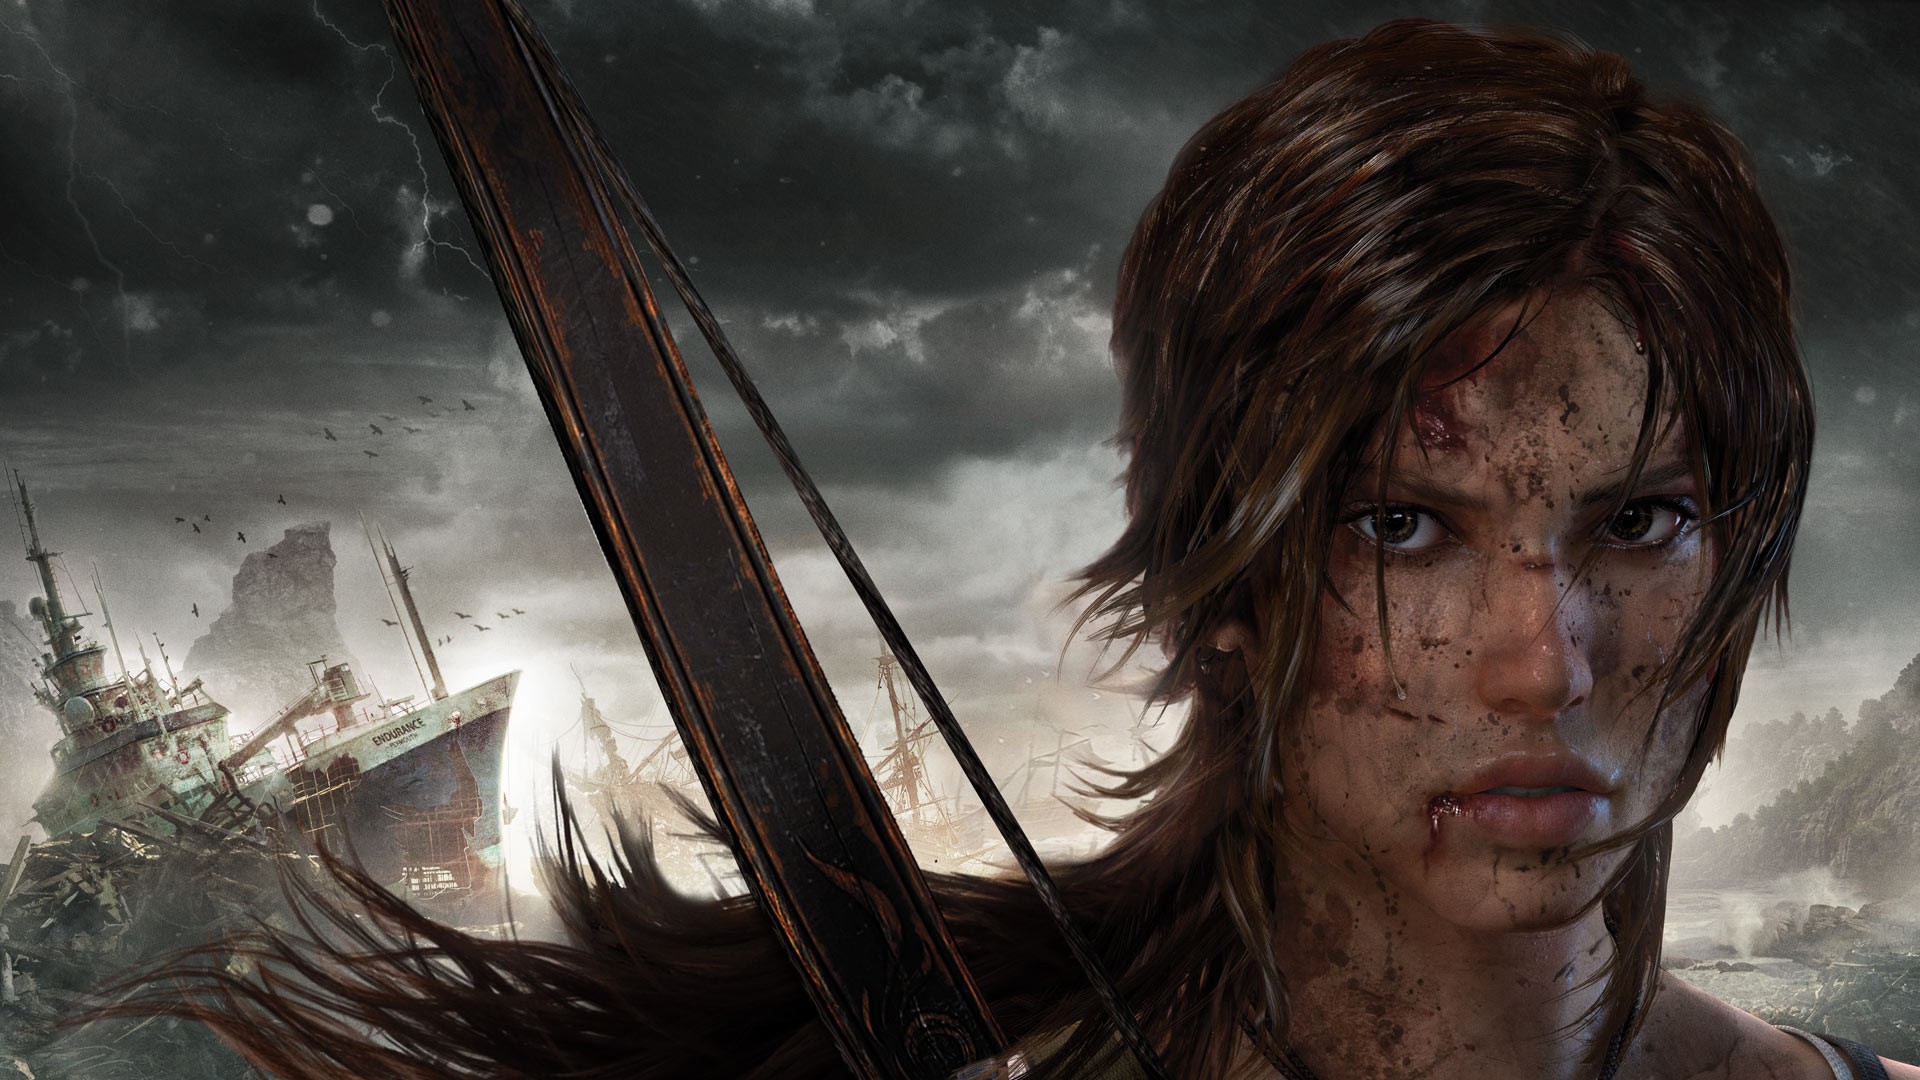 General 1920x1080 Tomb Raider ship wreck bow looking at viewer video games women video game girls wounds blood Tomb Raider (2013) Lara Croft (Tomb Raider) face closeup PC gaming shipwreck long hair brunette video game characters